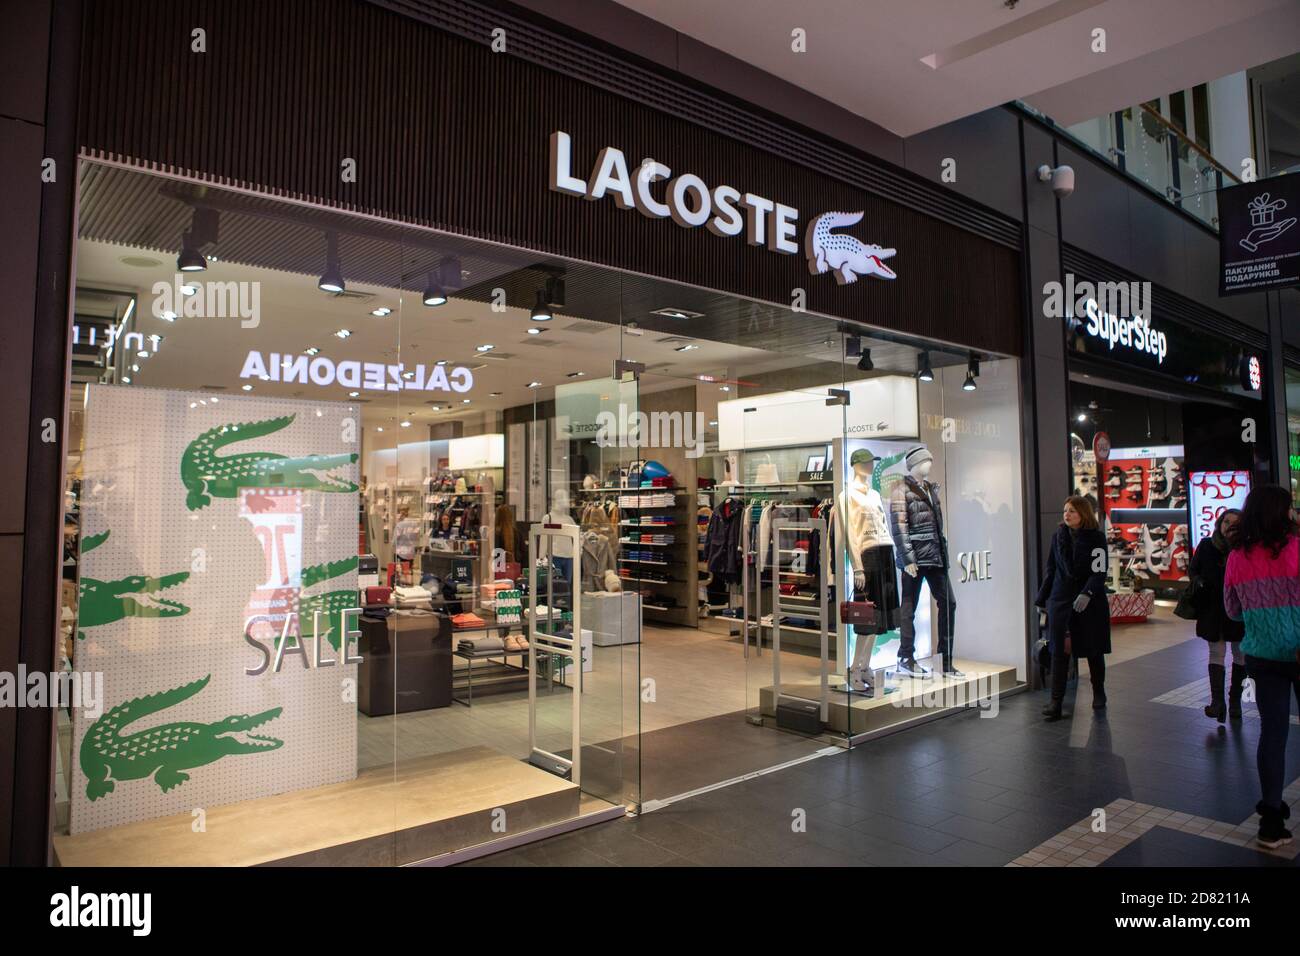 lacoste clothing outlet